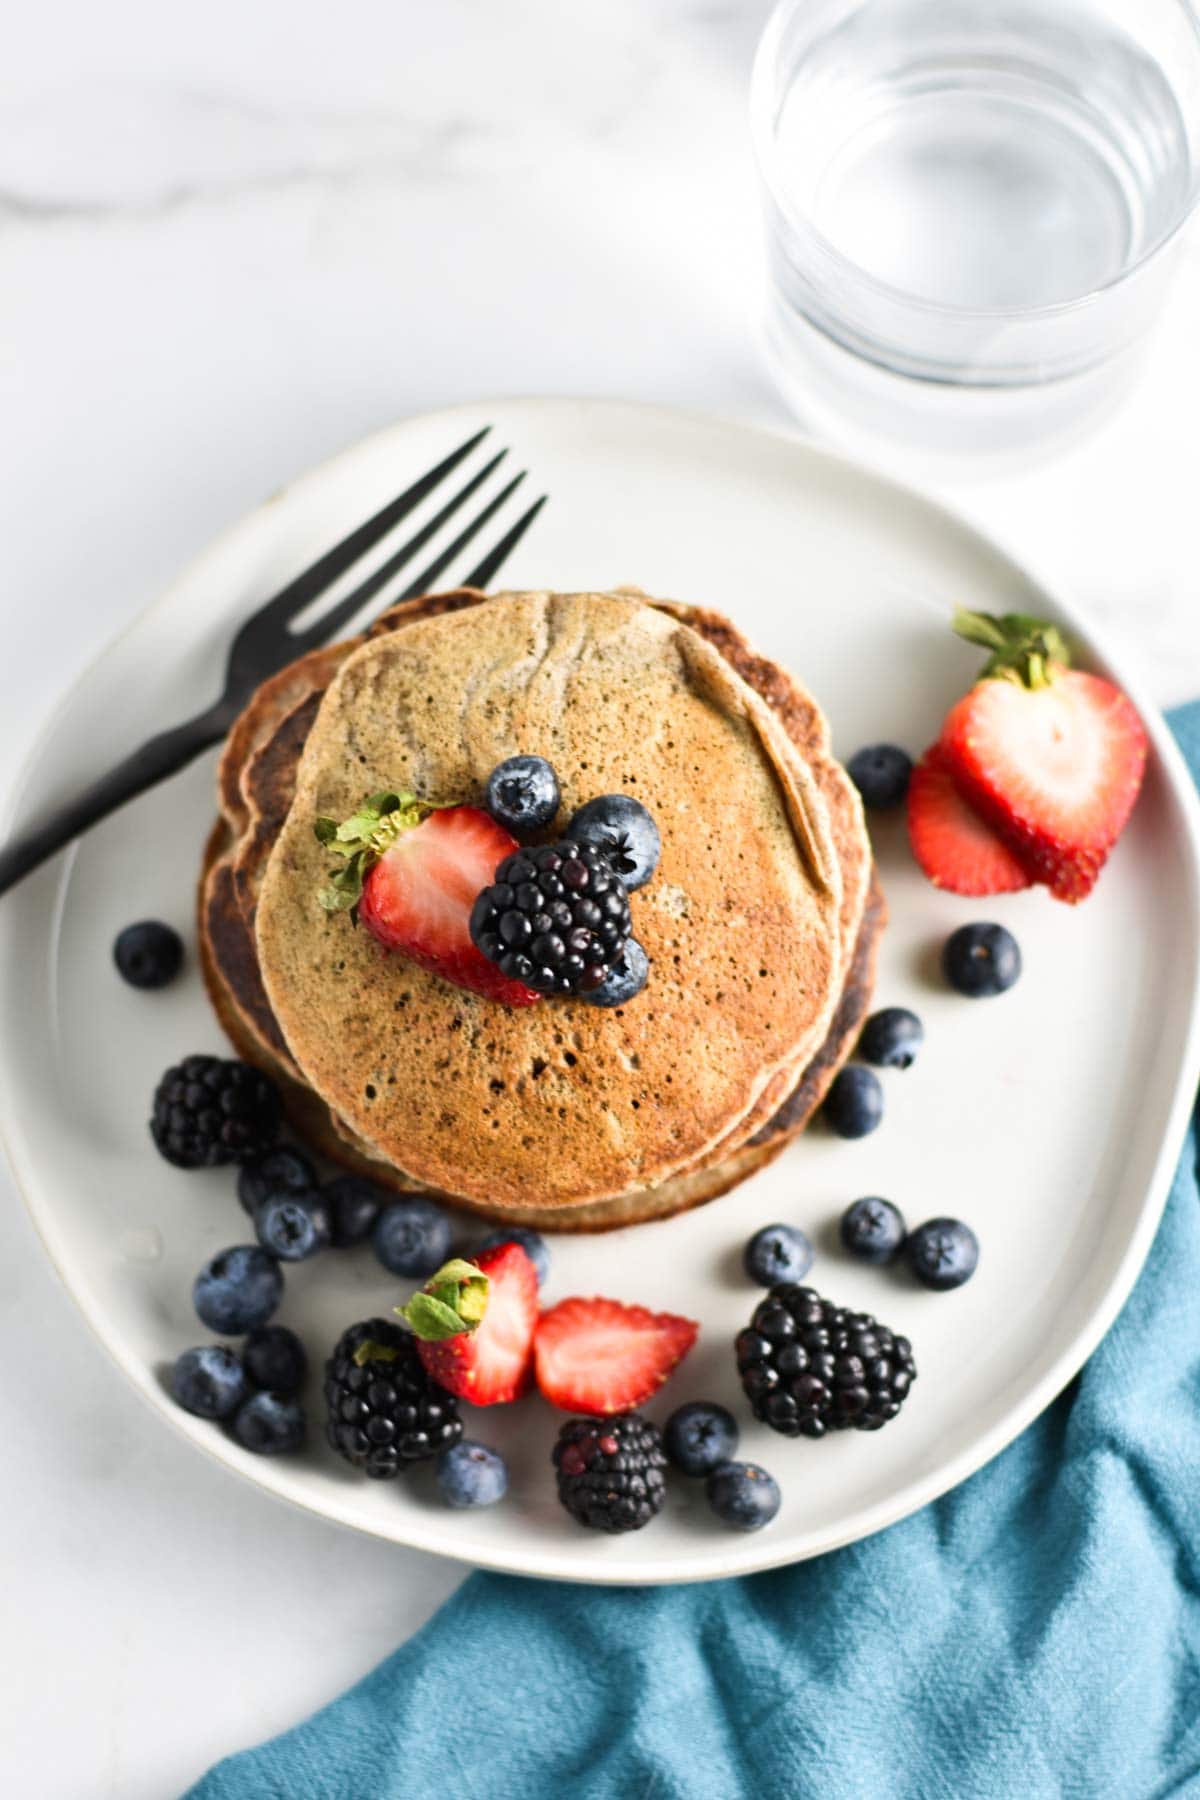 A stack of gluten free vegan pancakes with berries all around.